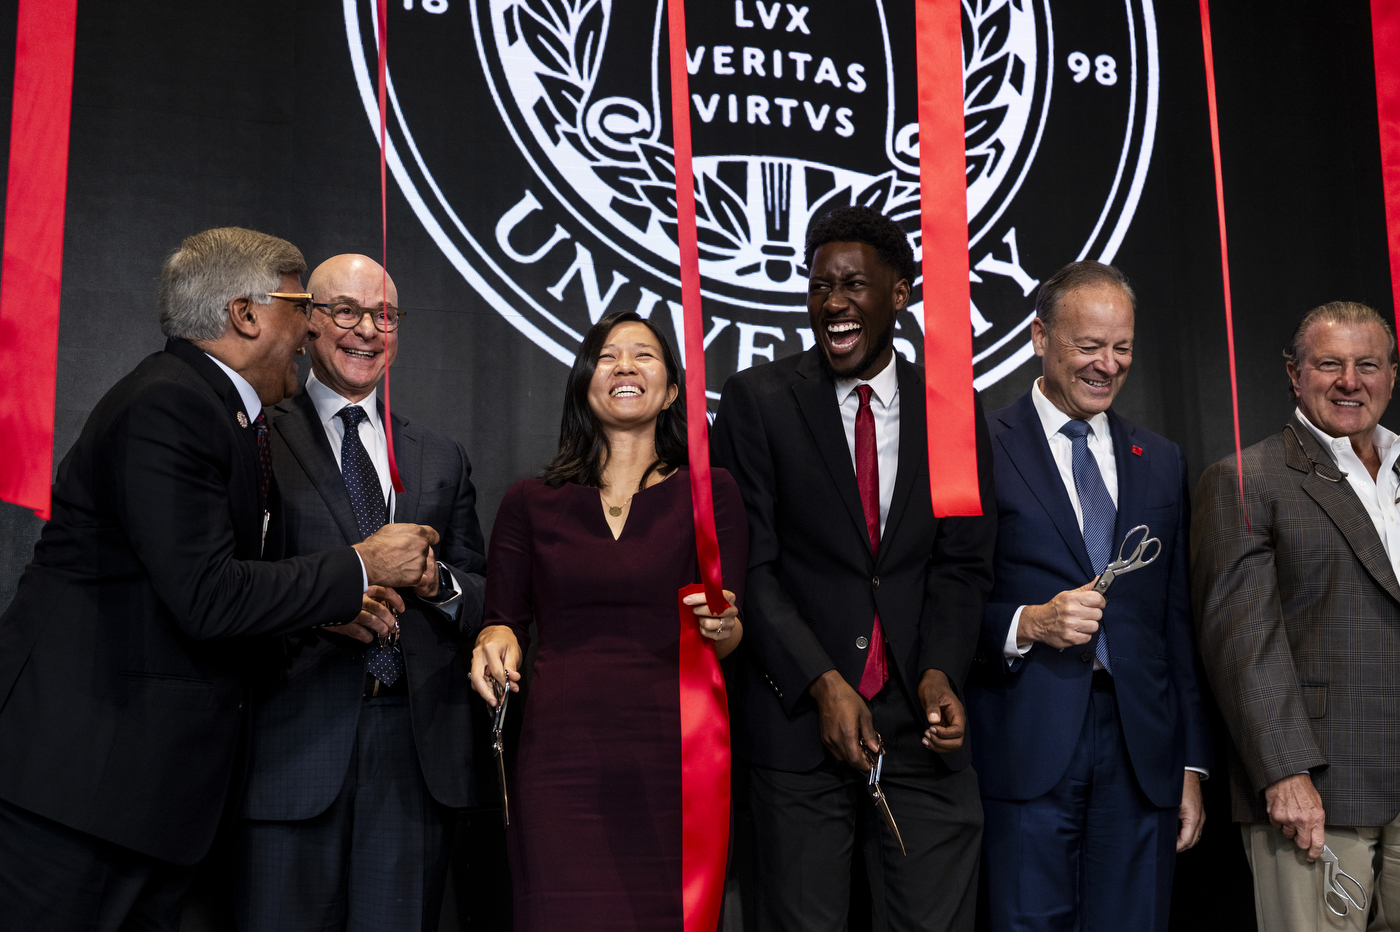 Six public figures laugh together while cutting red ribbons on a stage.